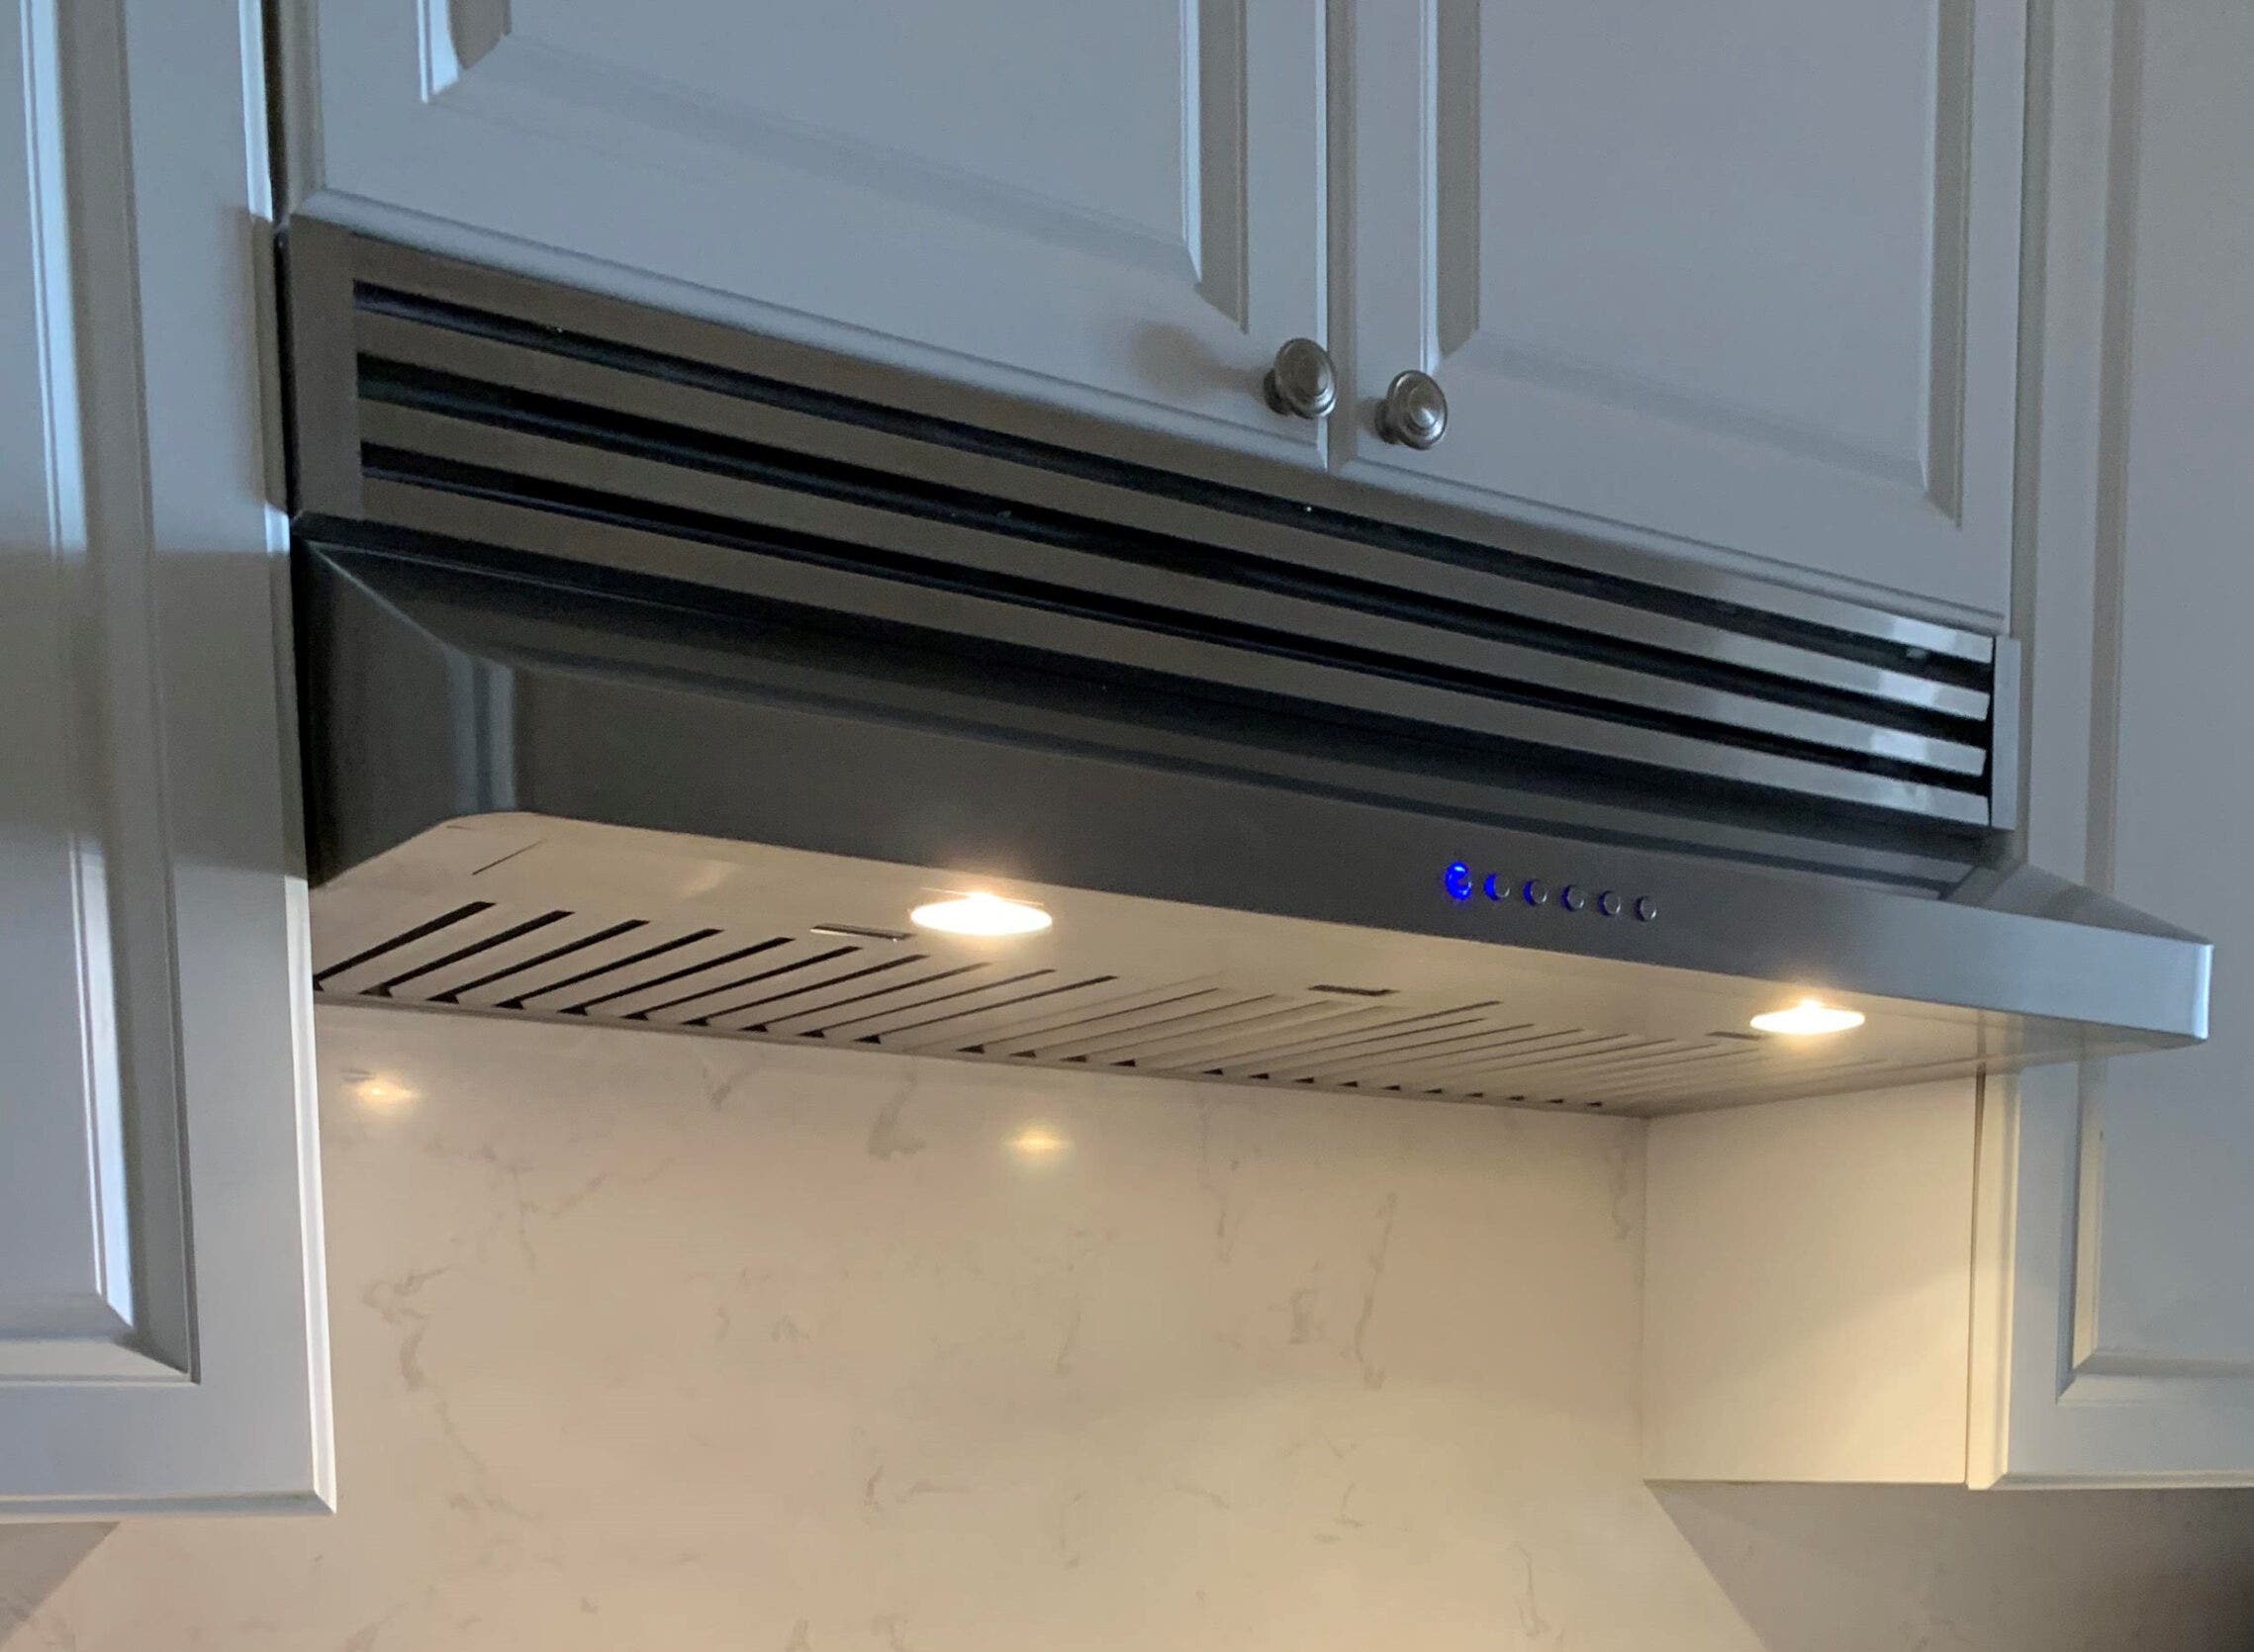 example of a ductless range hood